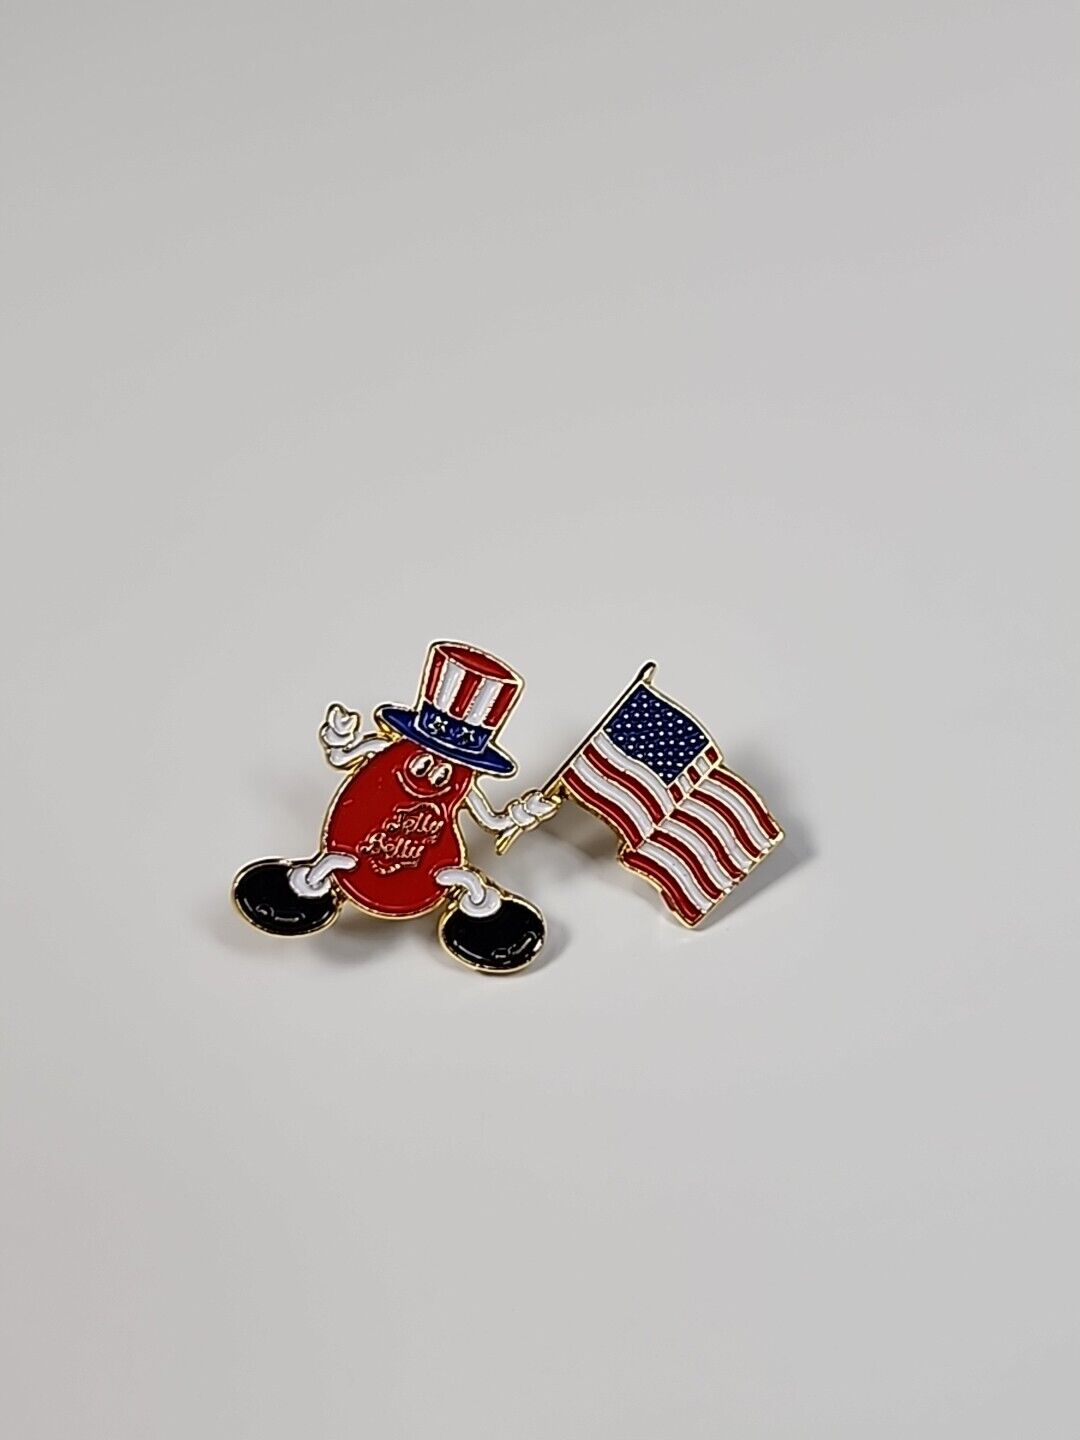 Jelly Belly Mascot Lapel Pin Mr Jelly Belly With American Flag*